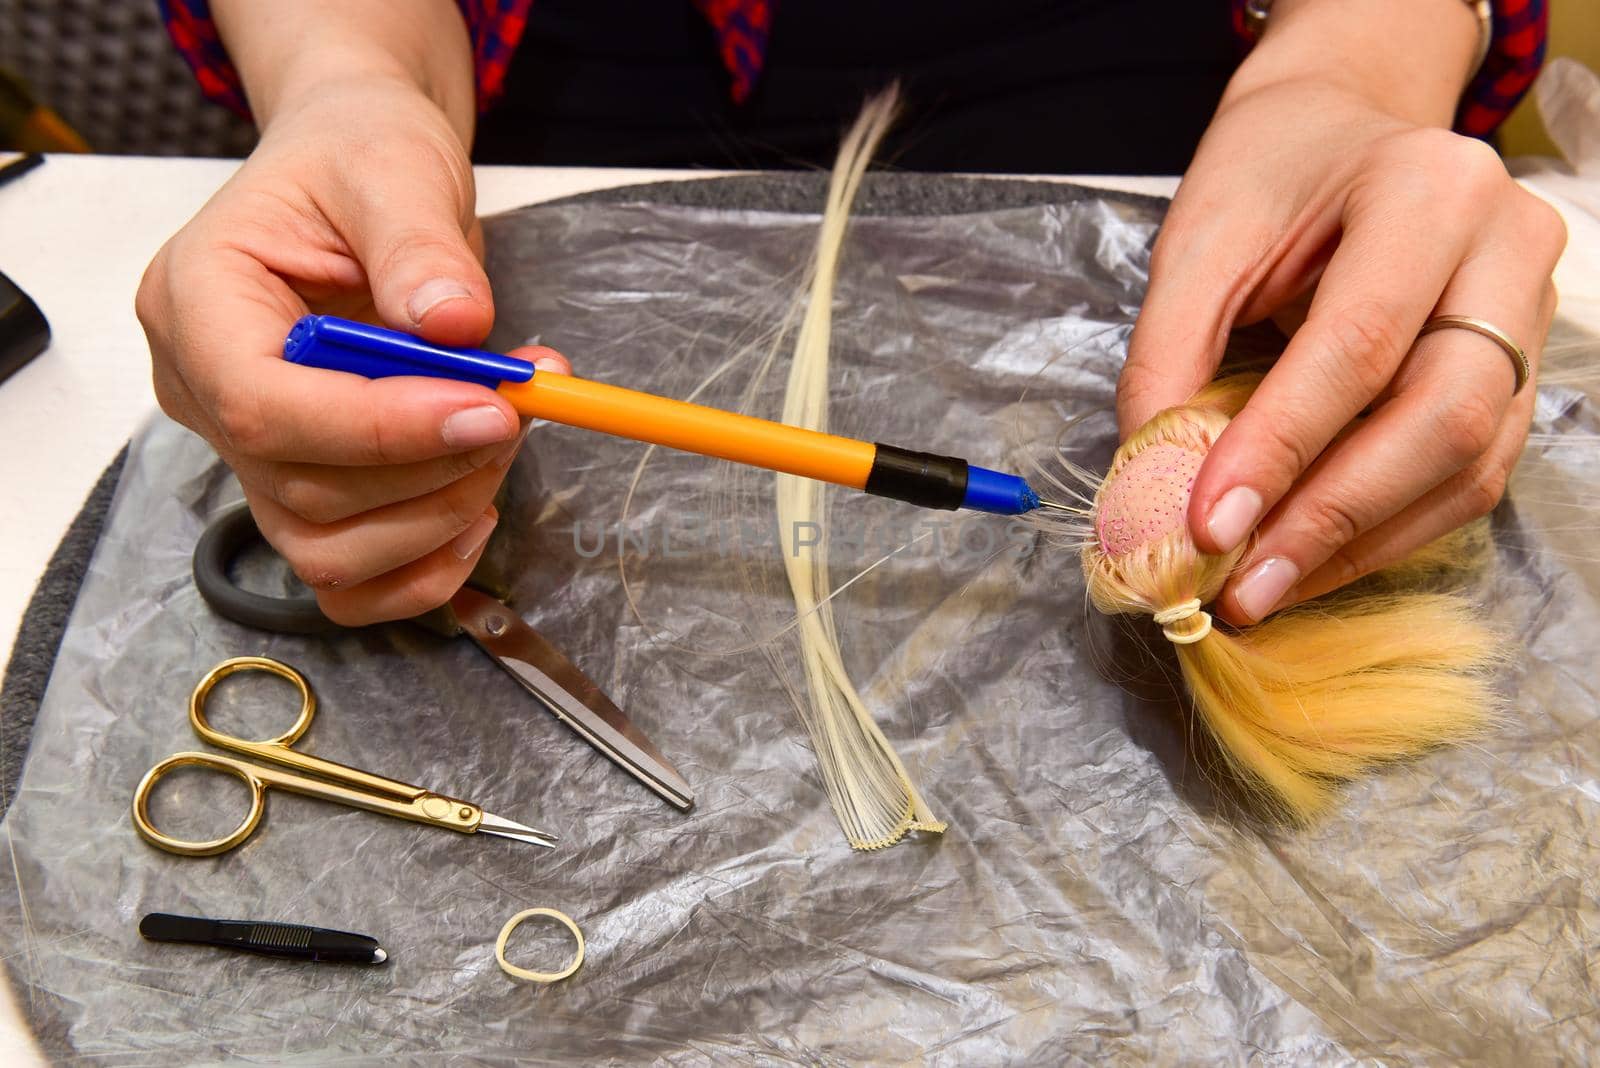 female hands and homemade tool on the table, how to make a hairstyle for a doll, hobby concept.